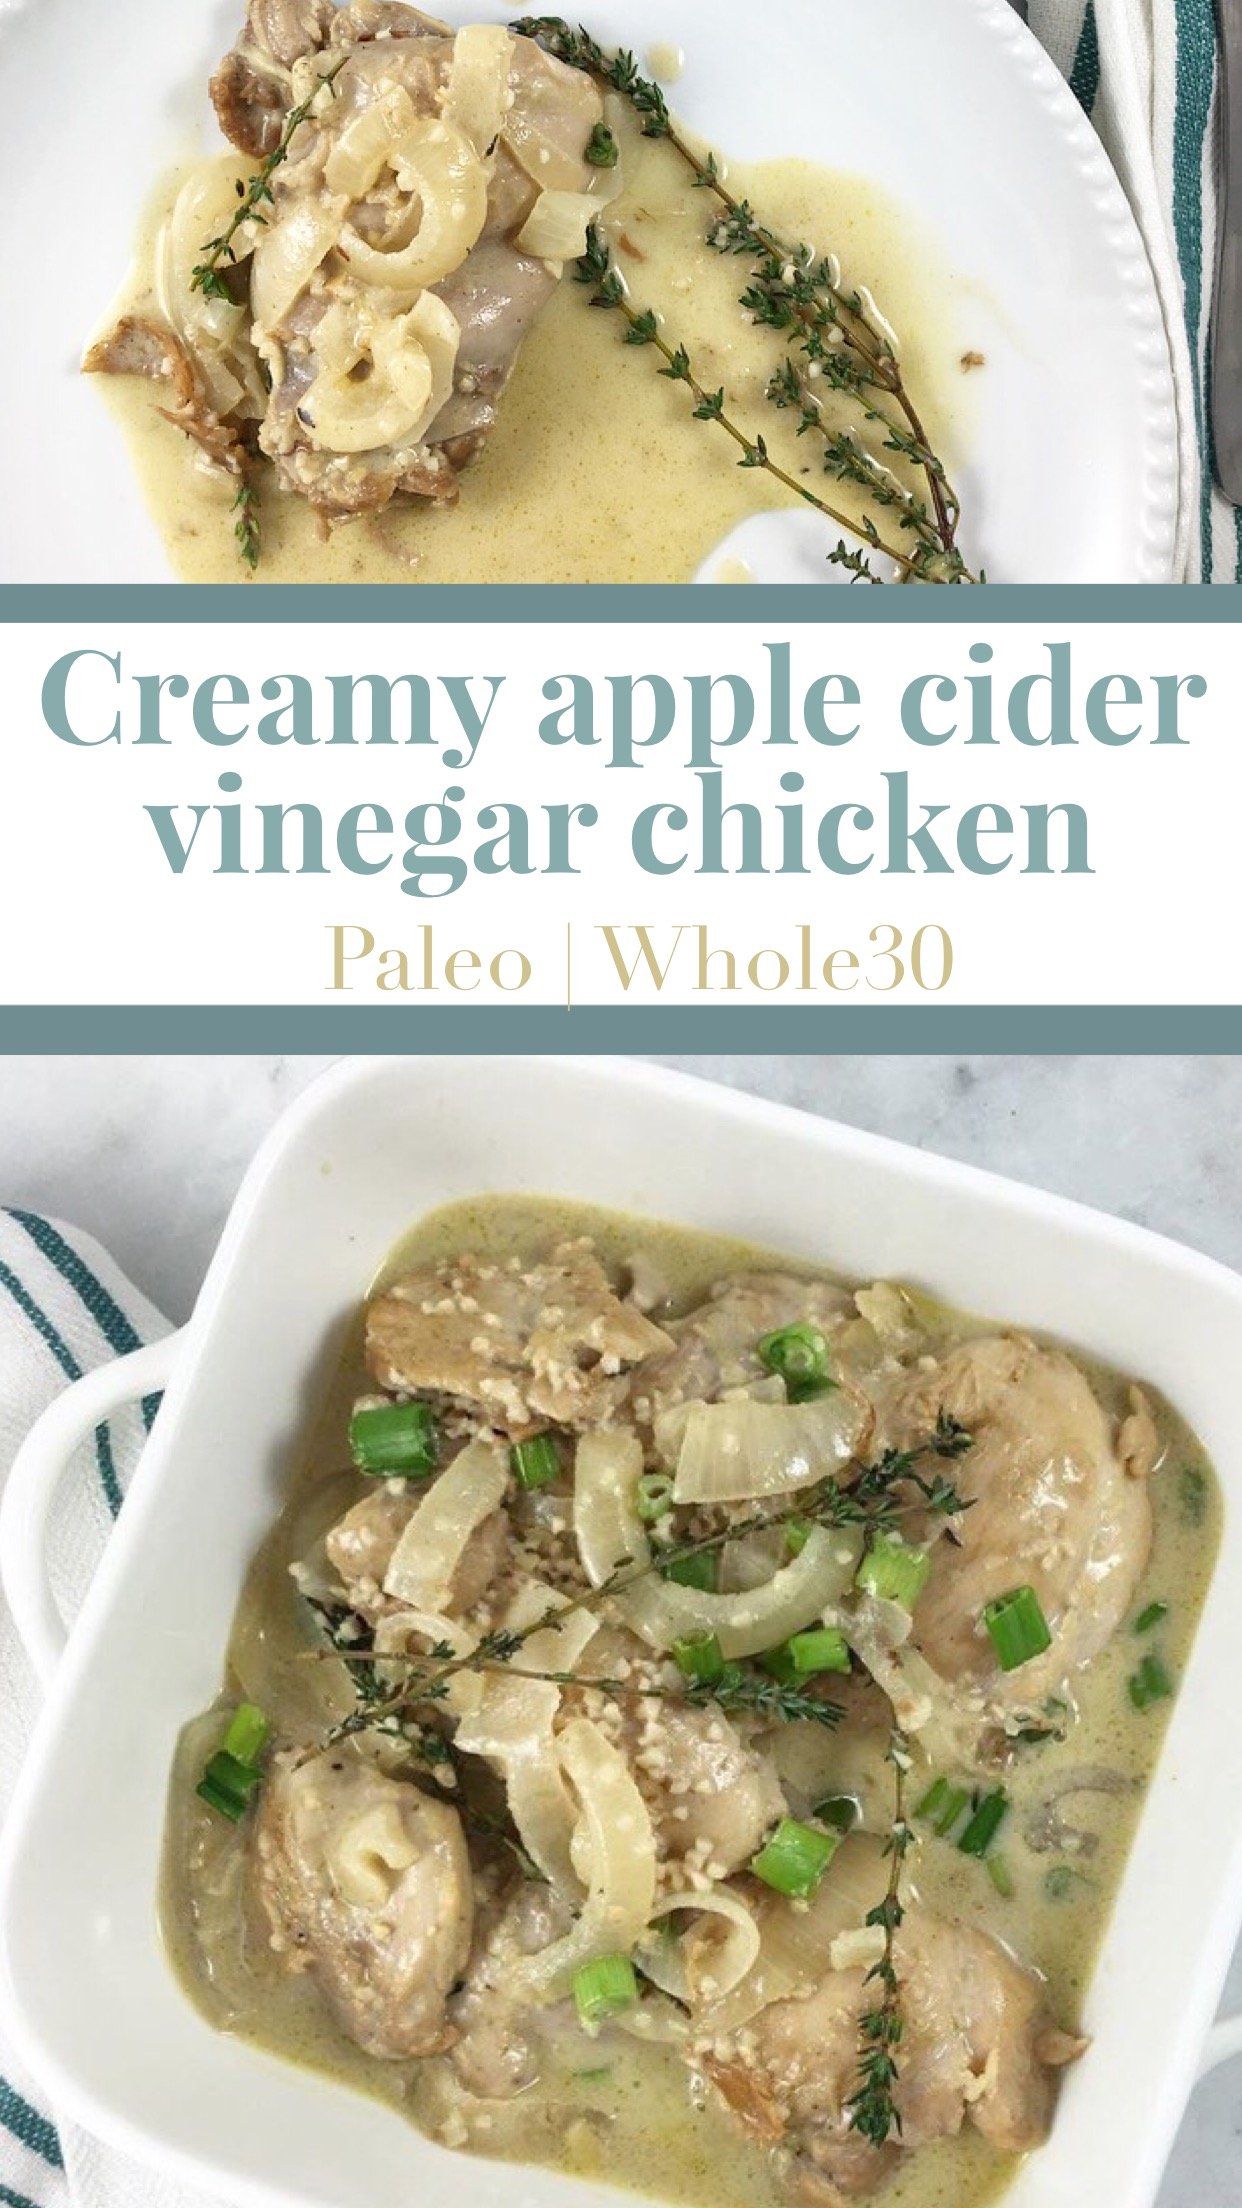 This creamy apple cider vinegar chicken is a quick and easy way to switch up your standard chicken breast routine